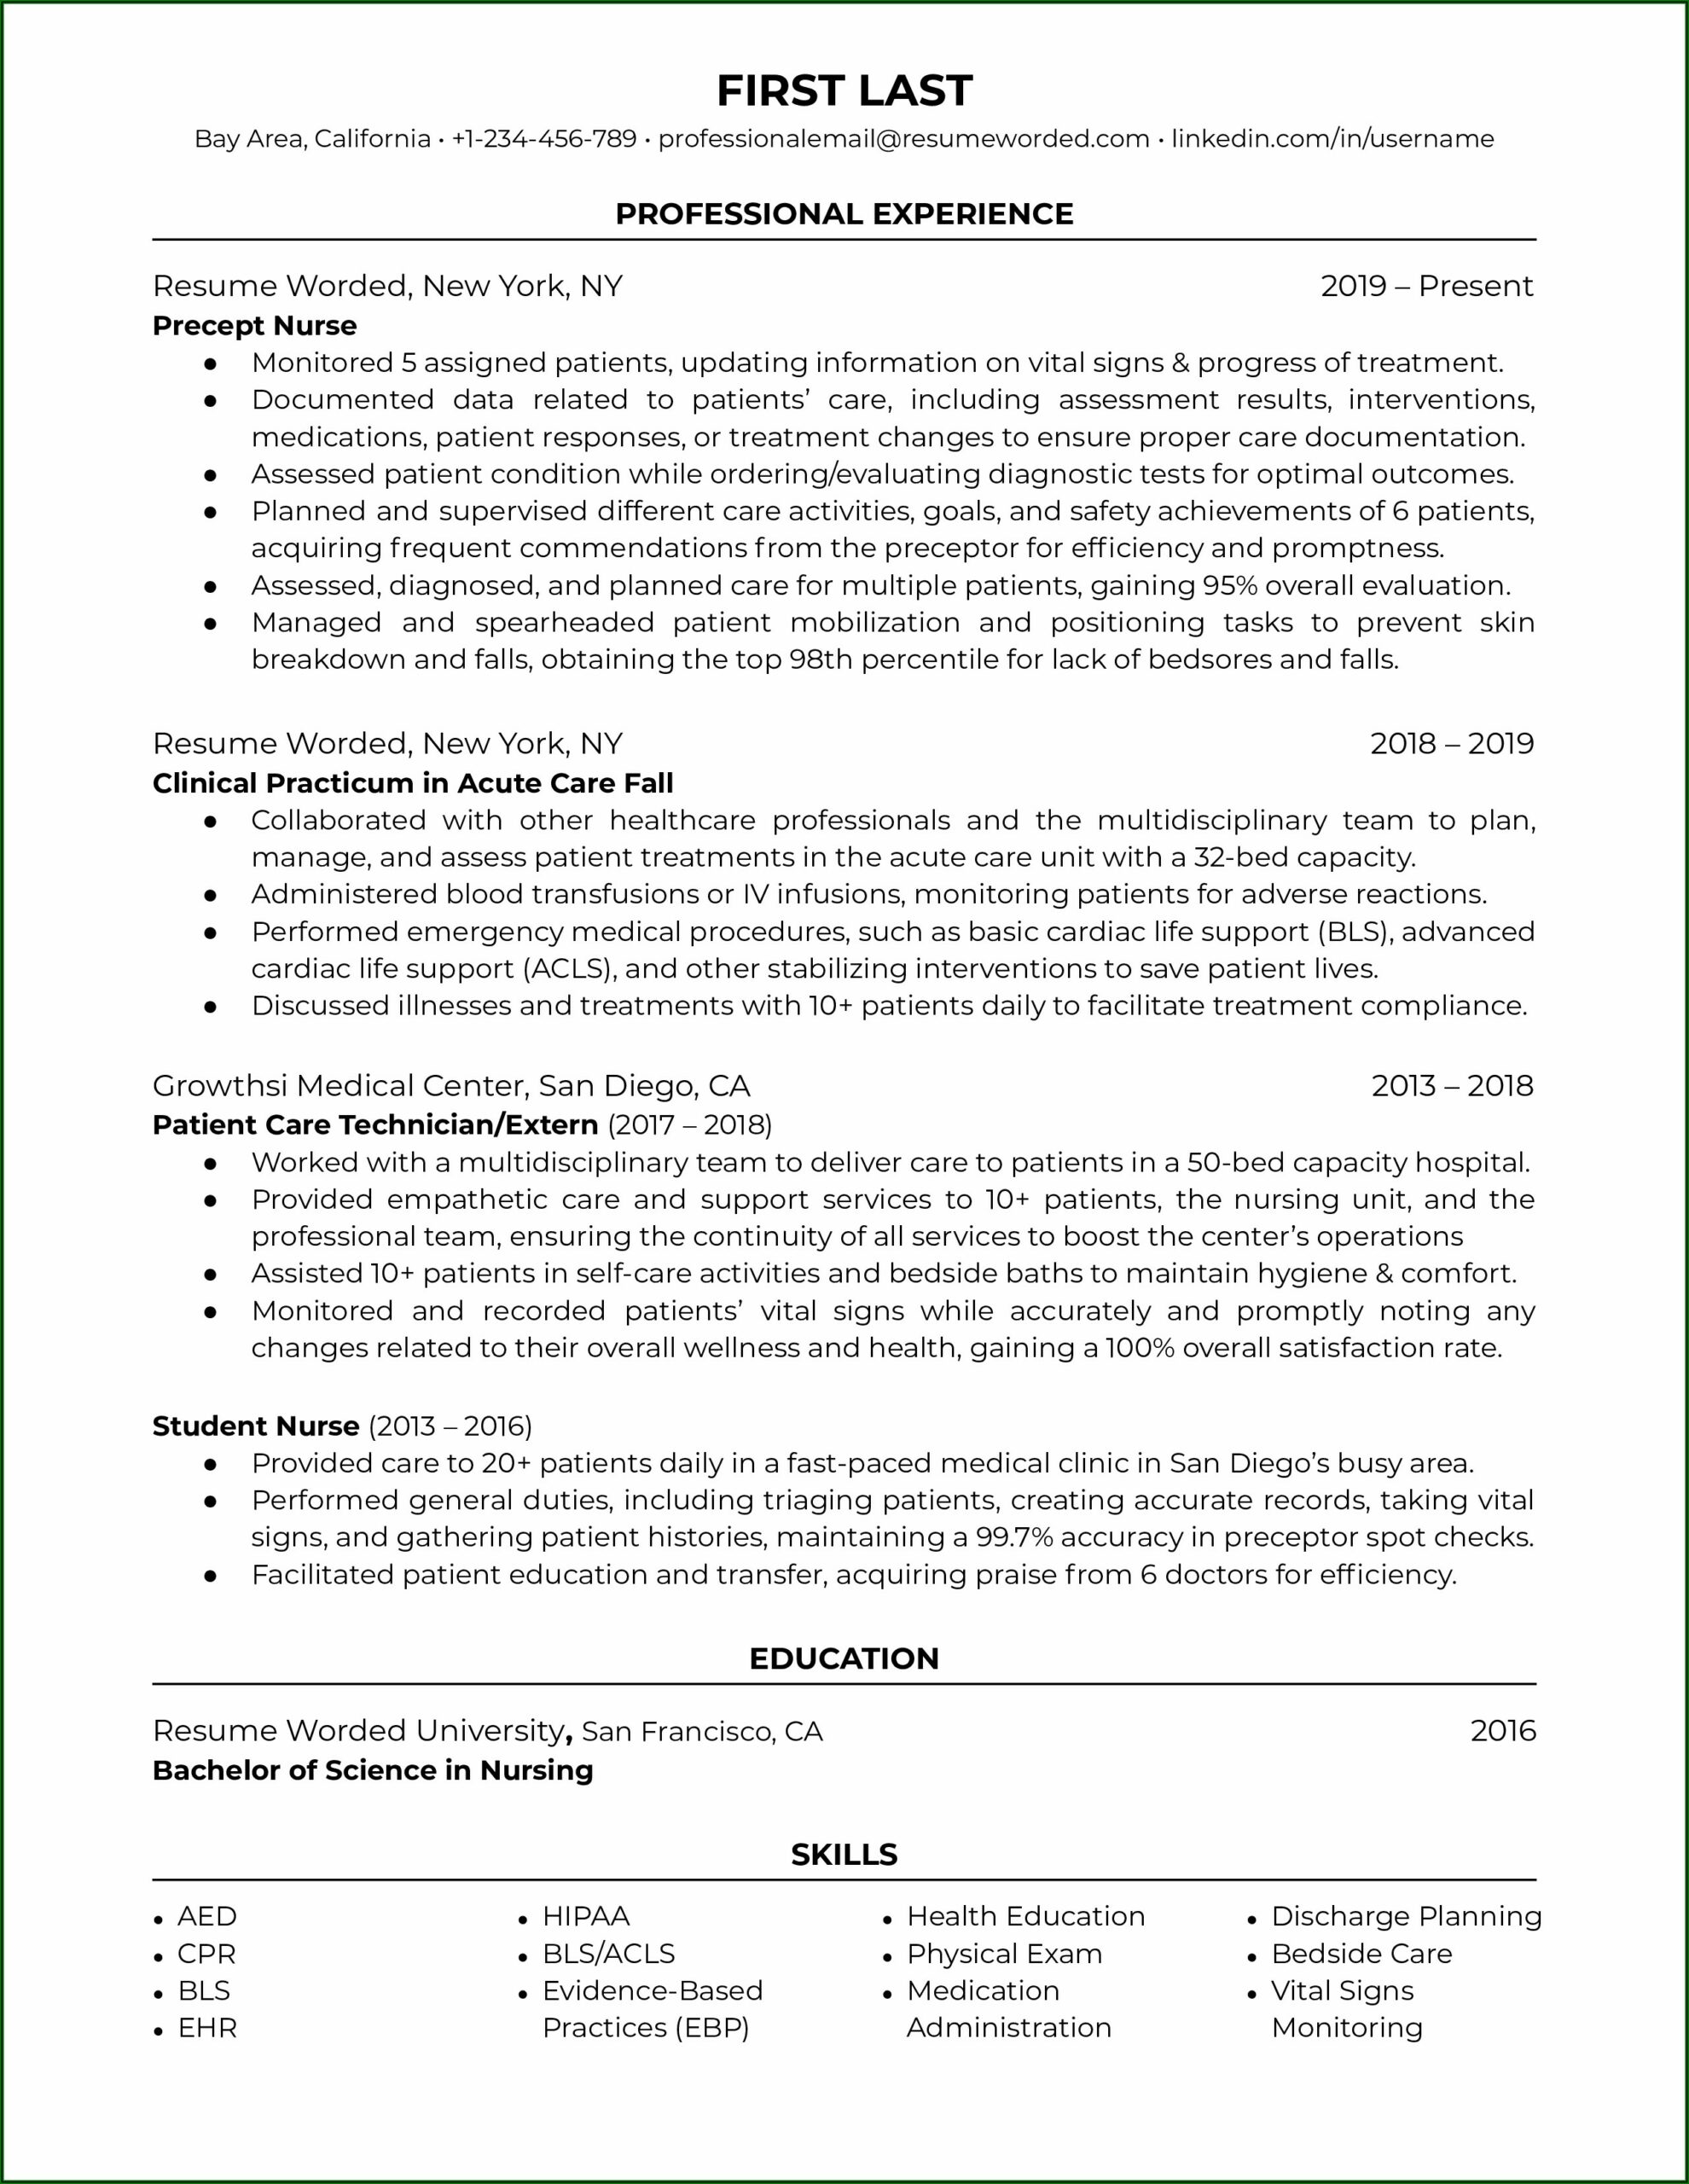 Example Resume For Nursing Graduate Without Experience